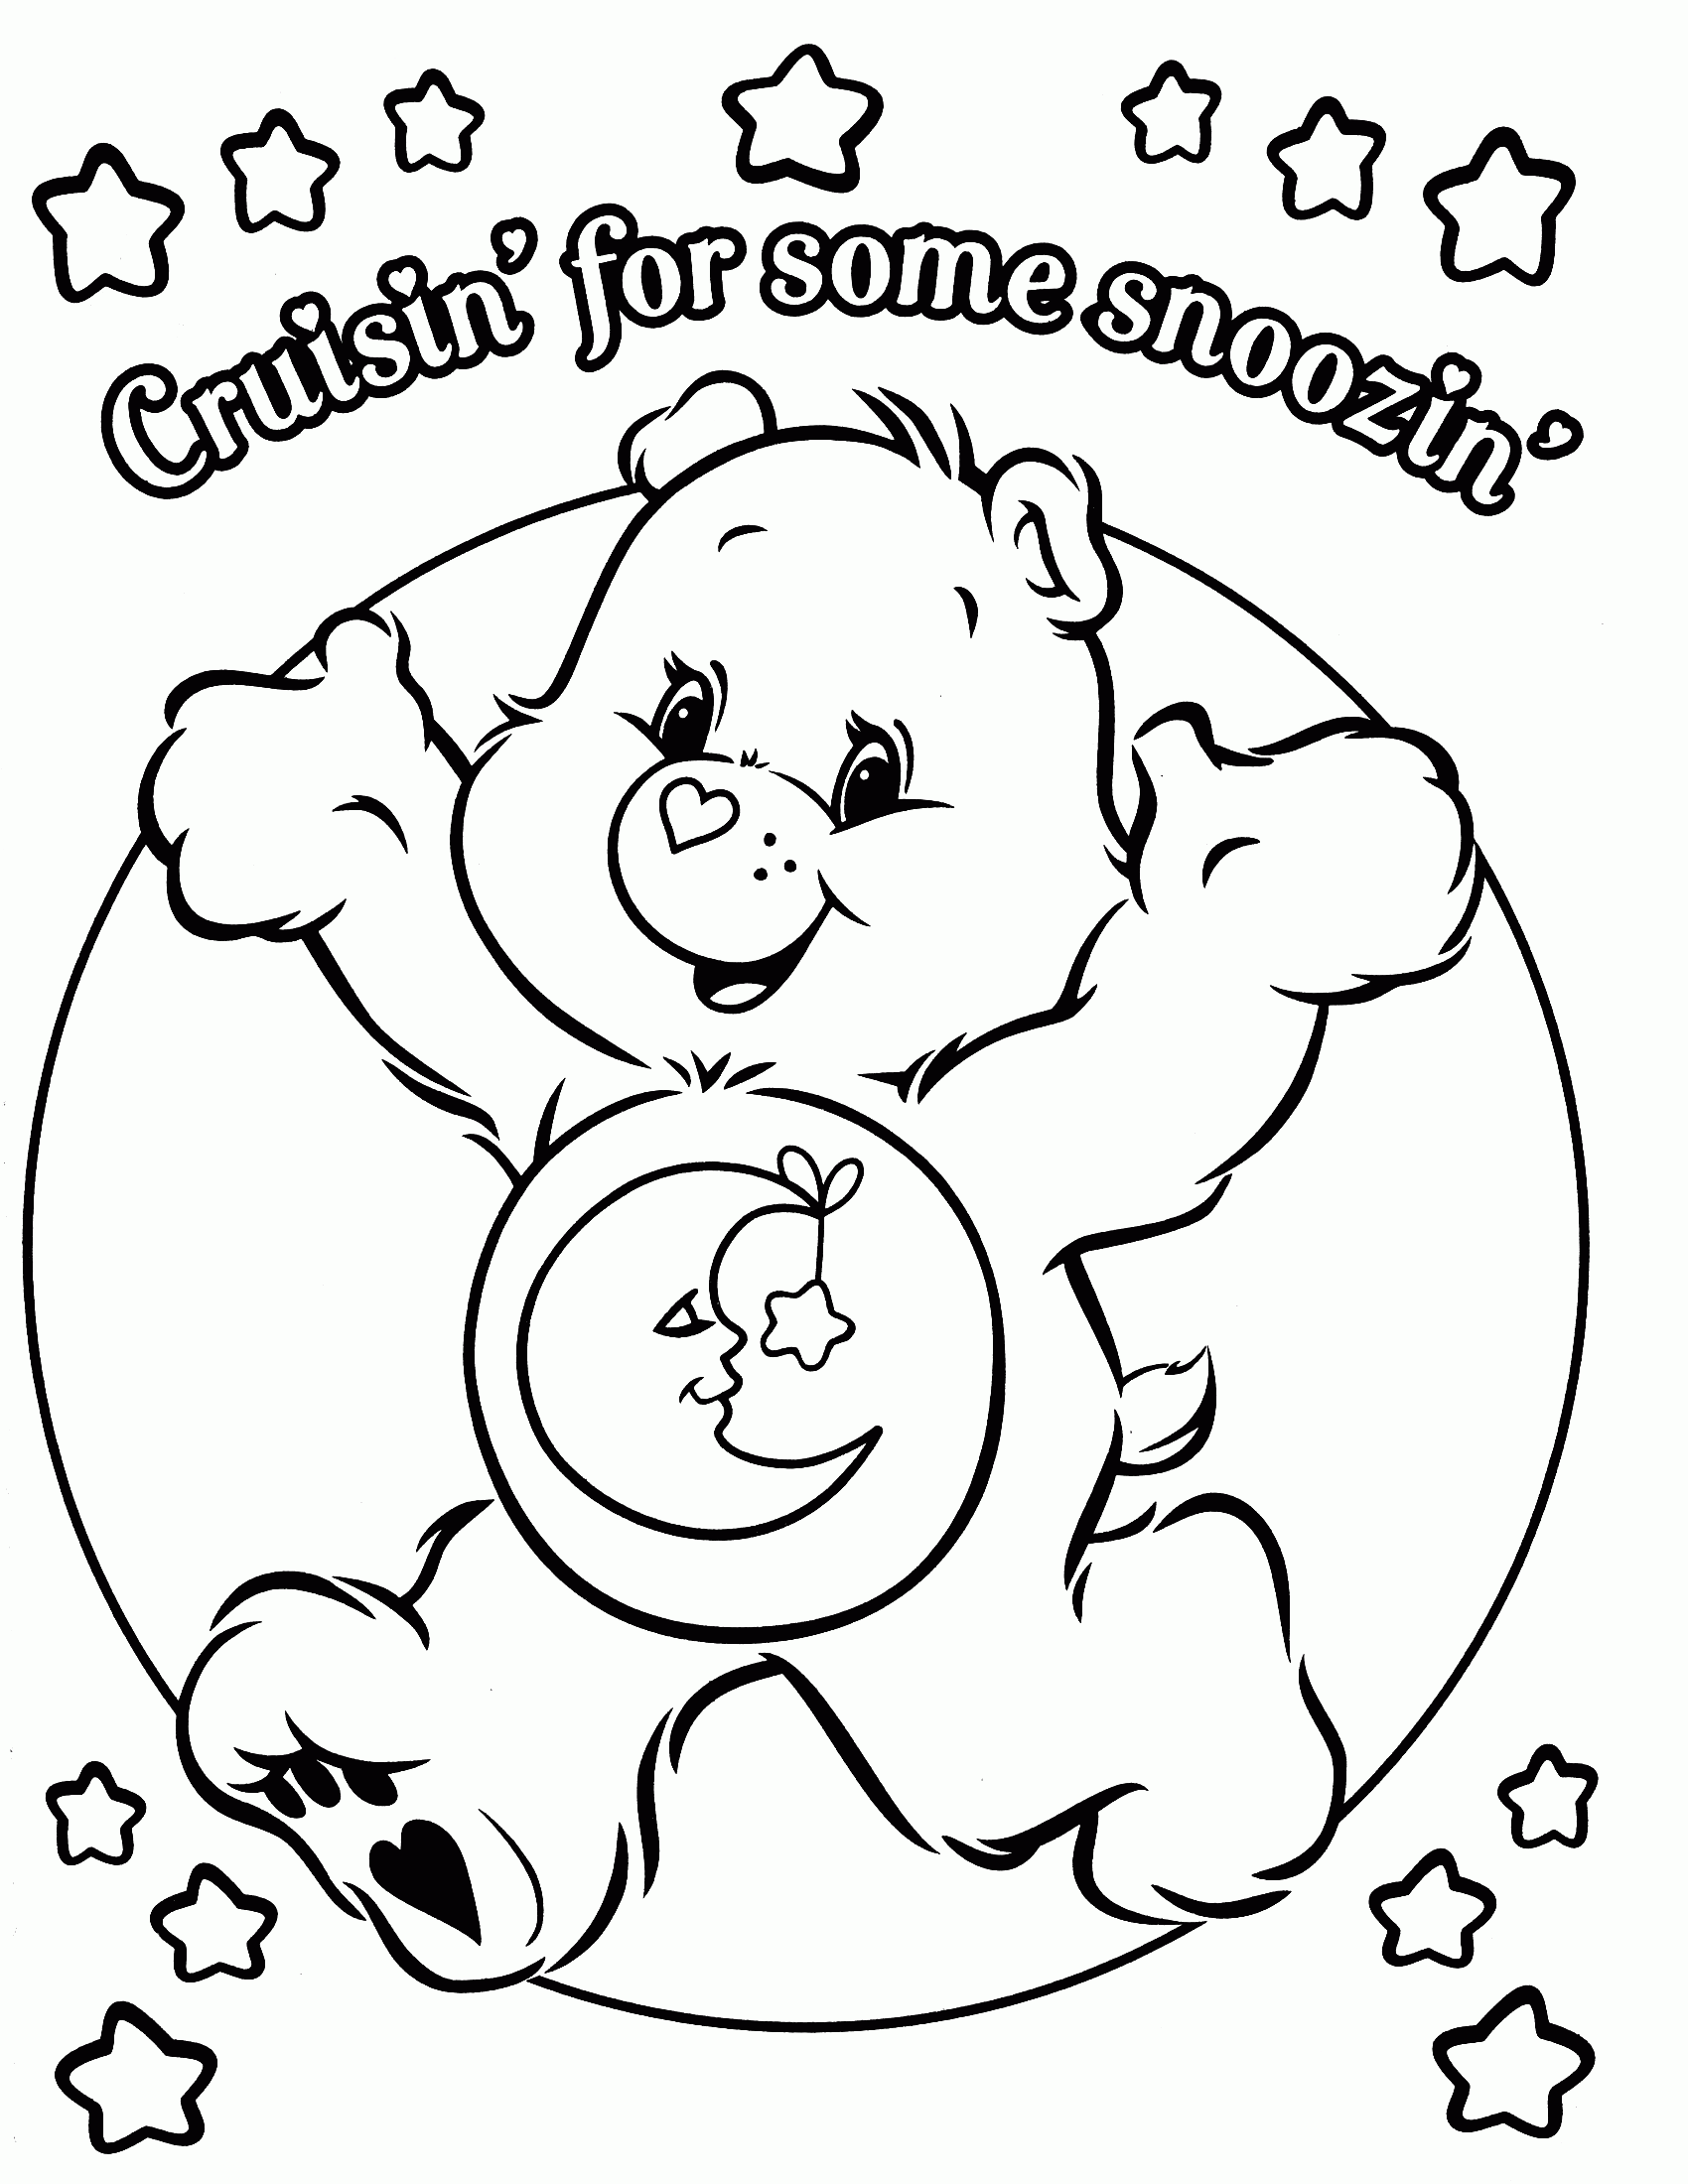 www.dj020.com/images/care-bear-star-coloring-pages...